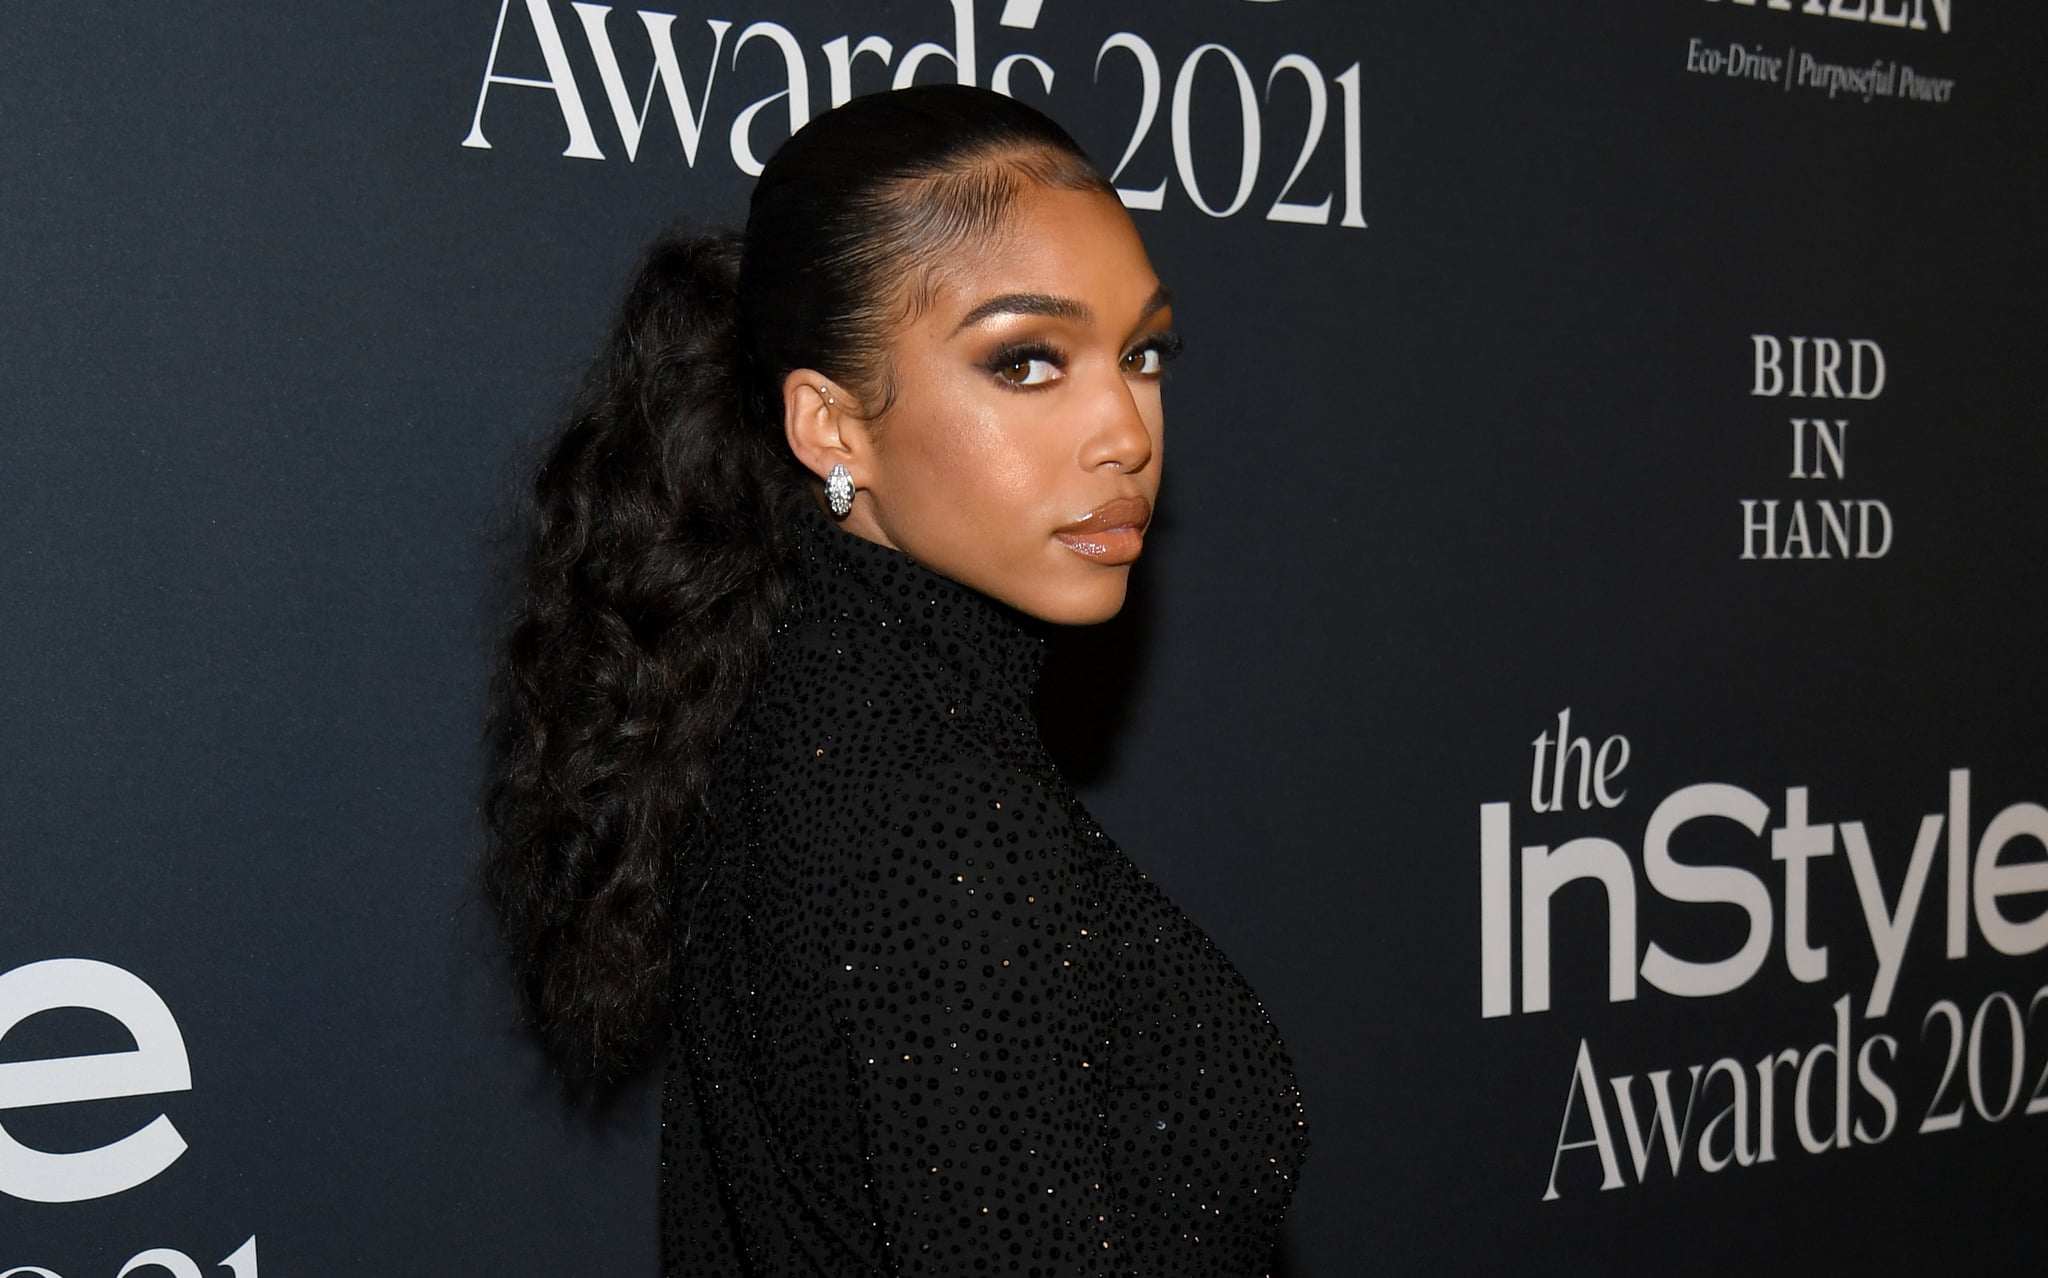 LOS ANGELES, CALIFORNIA - NOVEMBER 15: Lori Harvey attends the 2021 InStyle Awards at The Getty Centre on November 15, 2021 in Los Angeles, California. (Photo by Jon Kopaloff/Getty Images for InStyle)